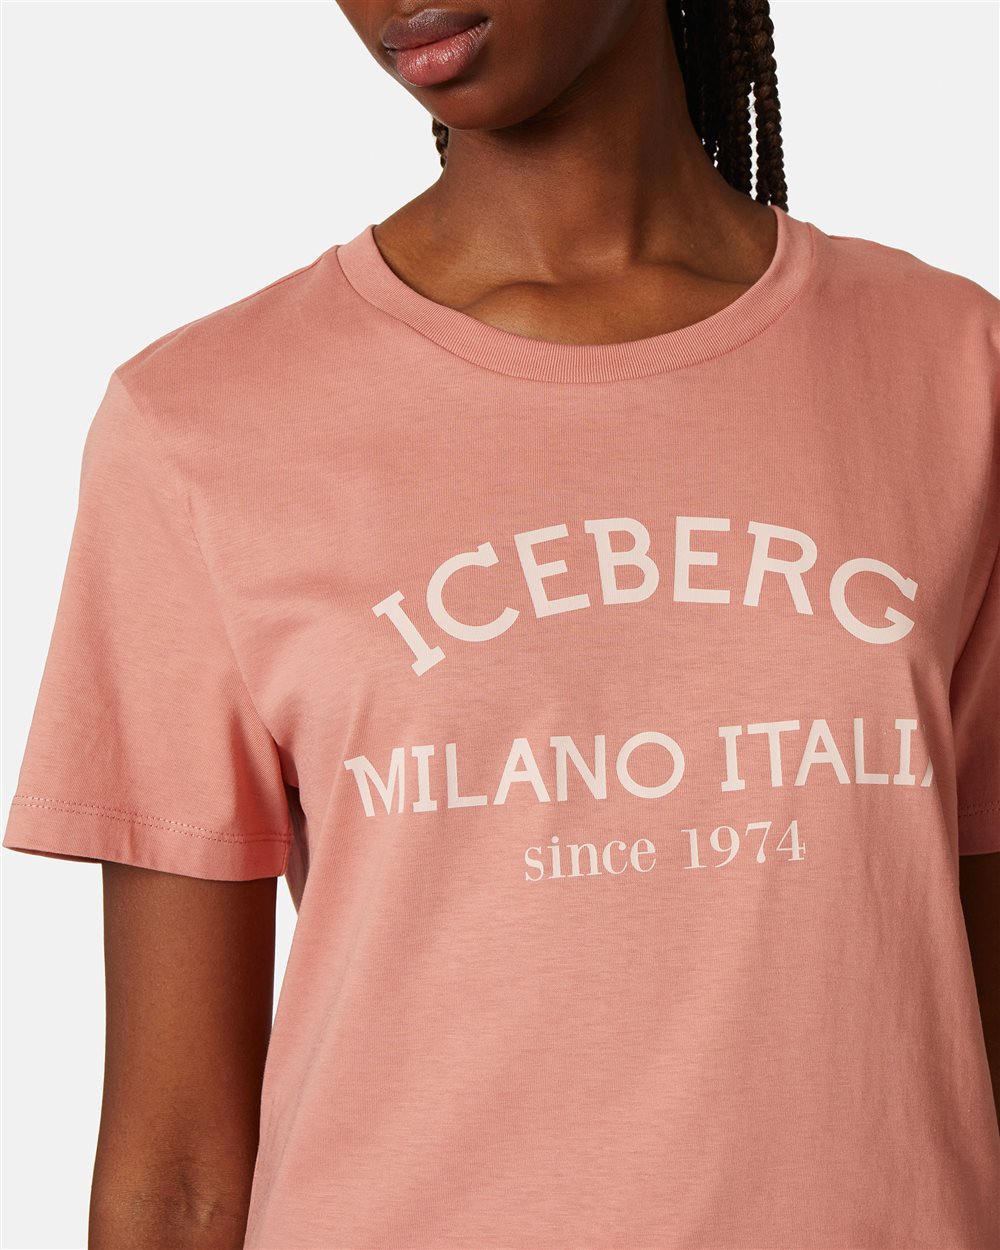 T-shirt with institutional logo - Iceberg - Official Website